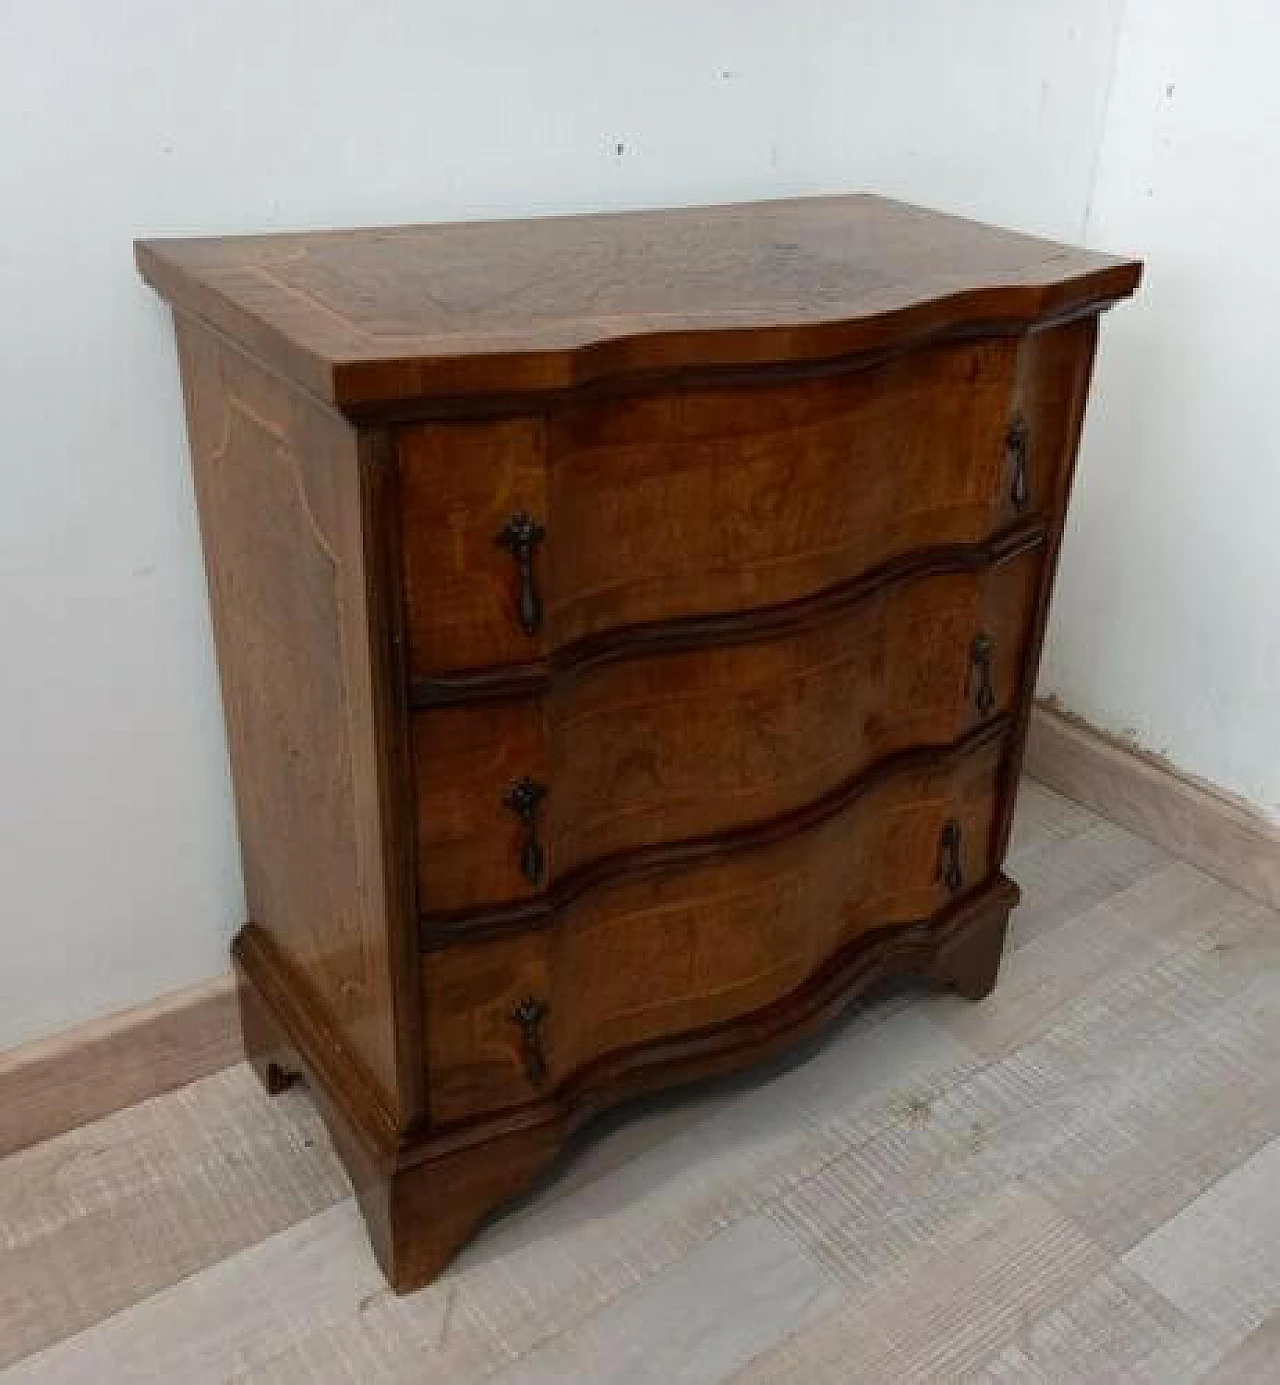 Cabinet with three drawers panelled in walnut and briarwood, 1940s 1326205